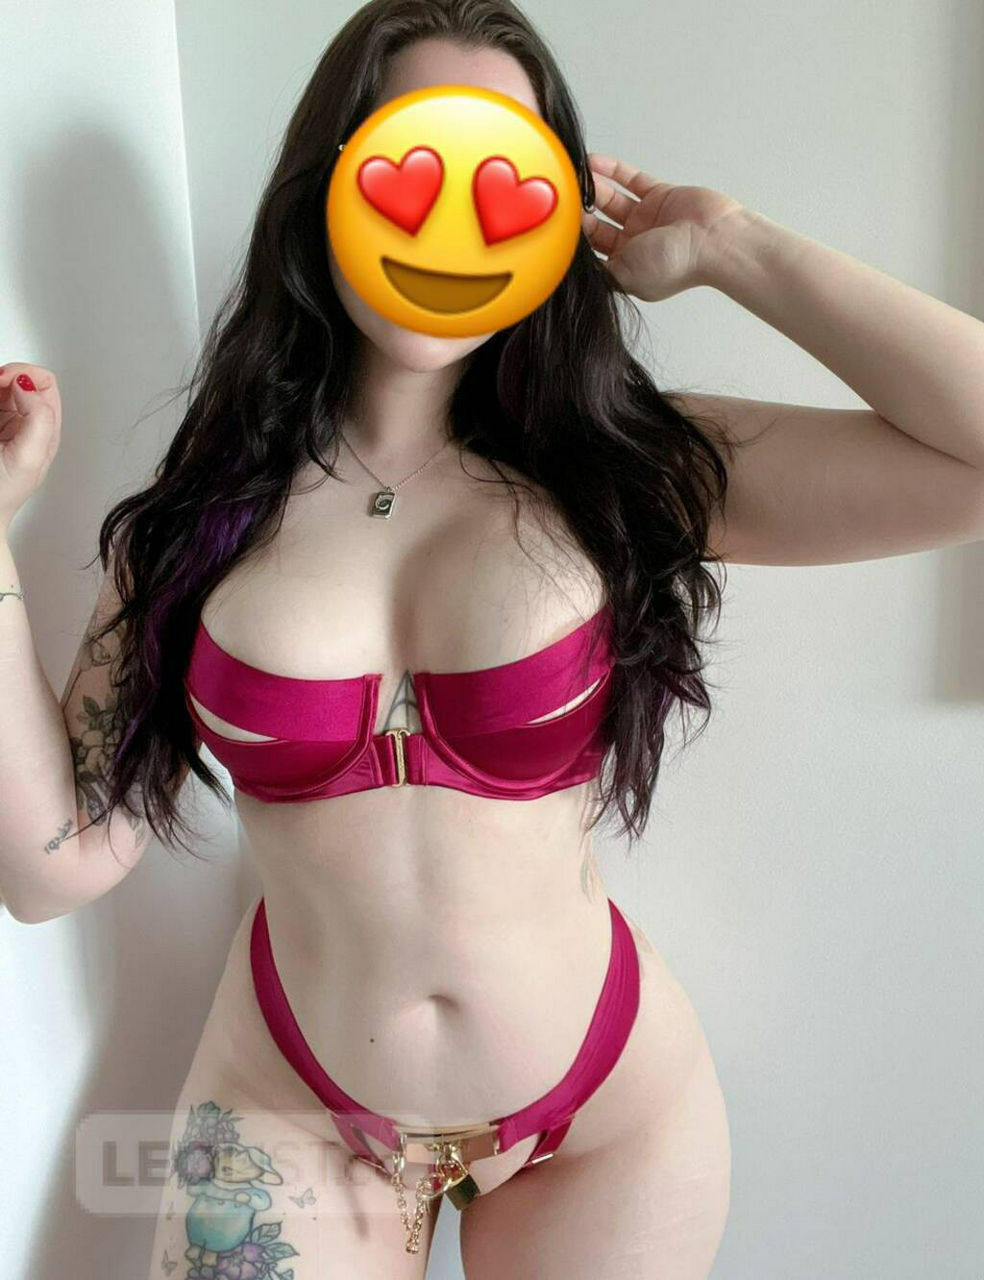 Escorts Winnipeg, Manitoba I’m available for hookup in/out glory hole snow&content avil